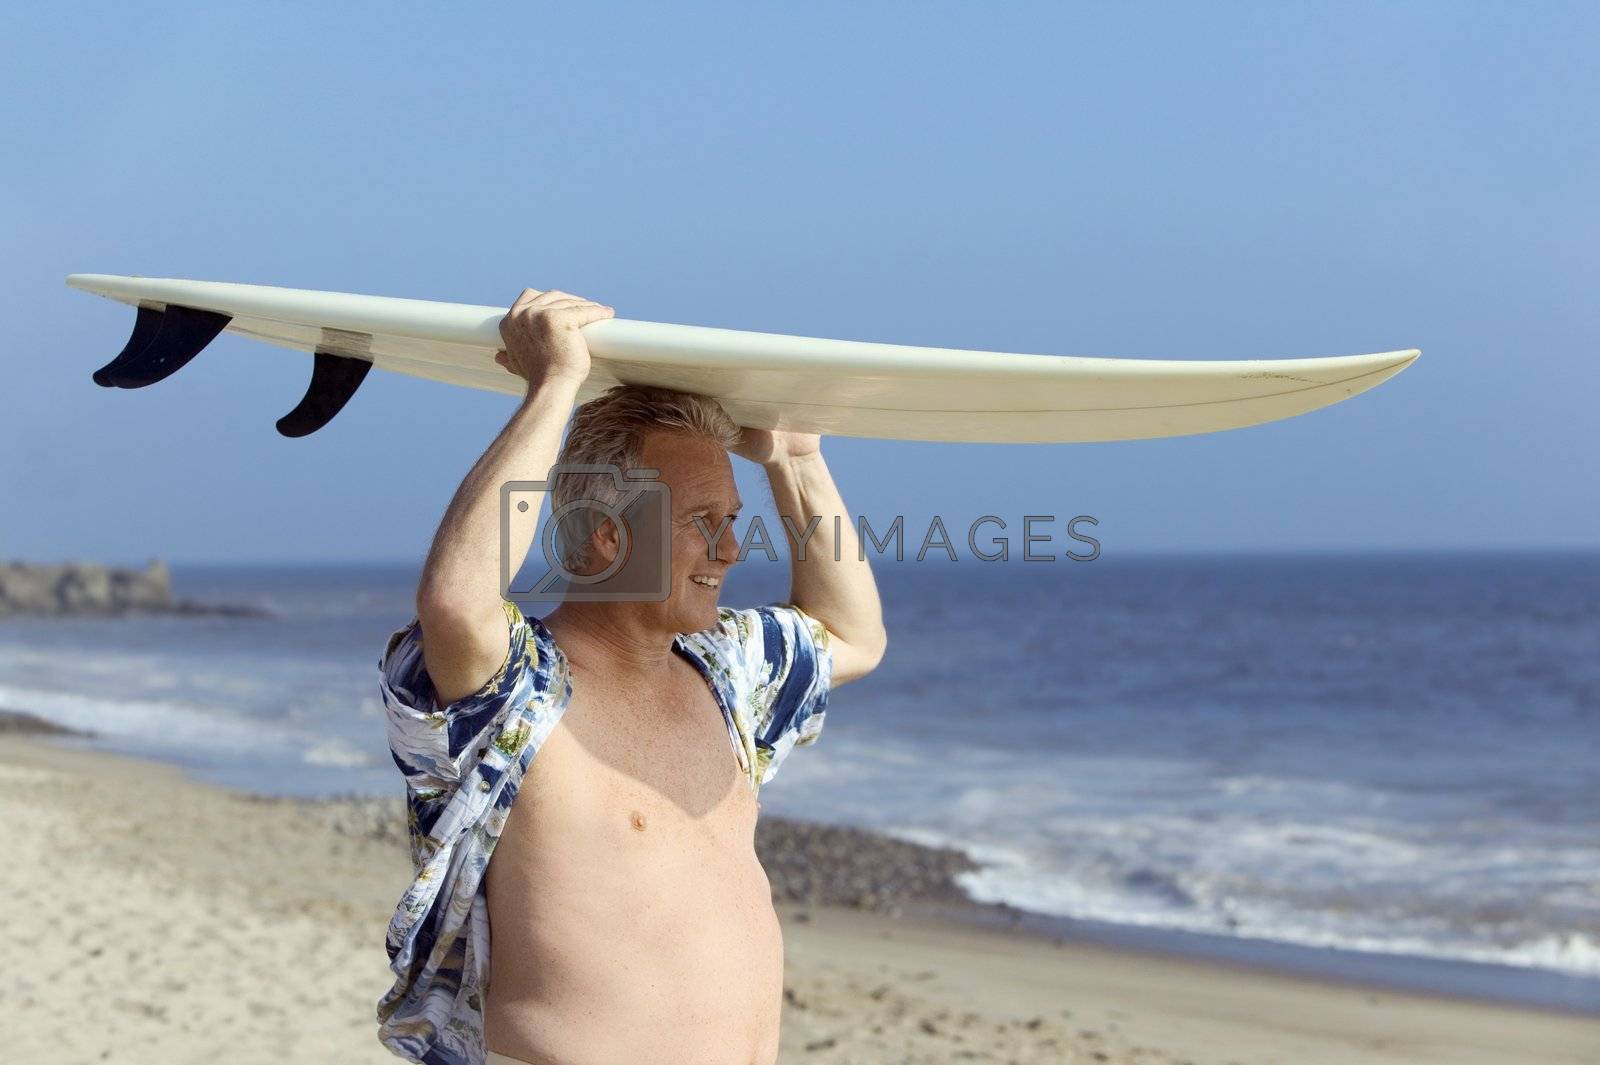 Royalty free image of Surfer Carrying Surfboard by moodboard